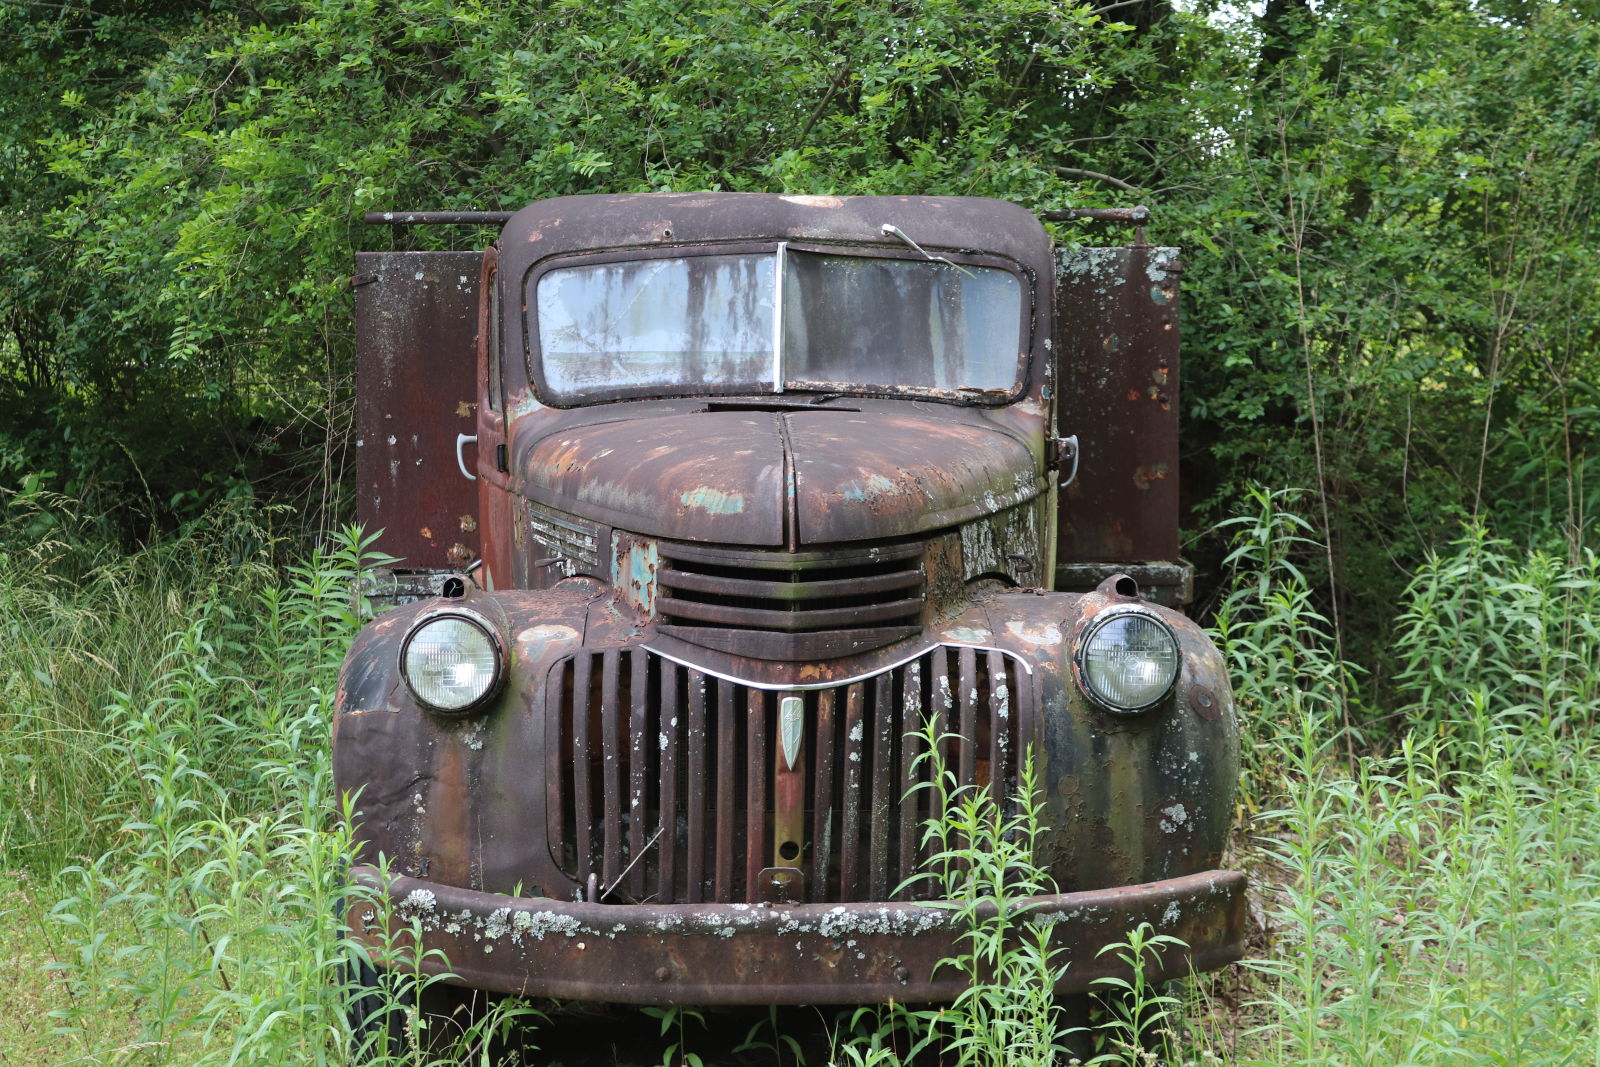 Pre-war Chevy flatbed found somewhere in Alabama on a highway running parallel to I59